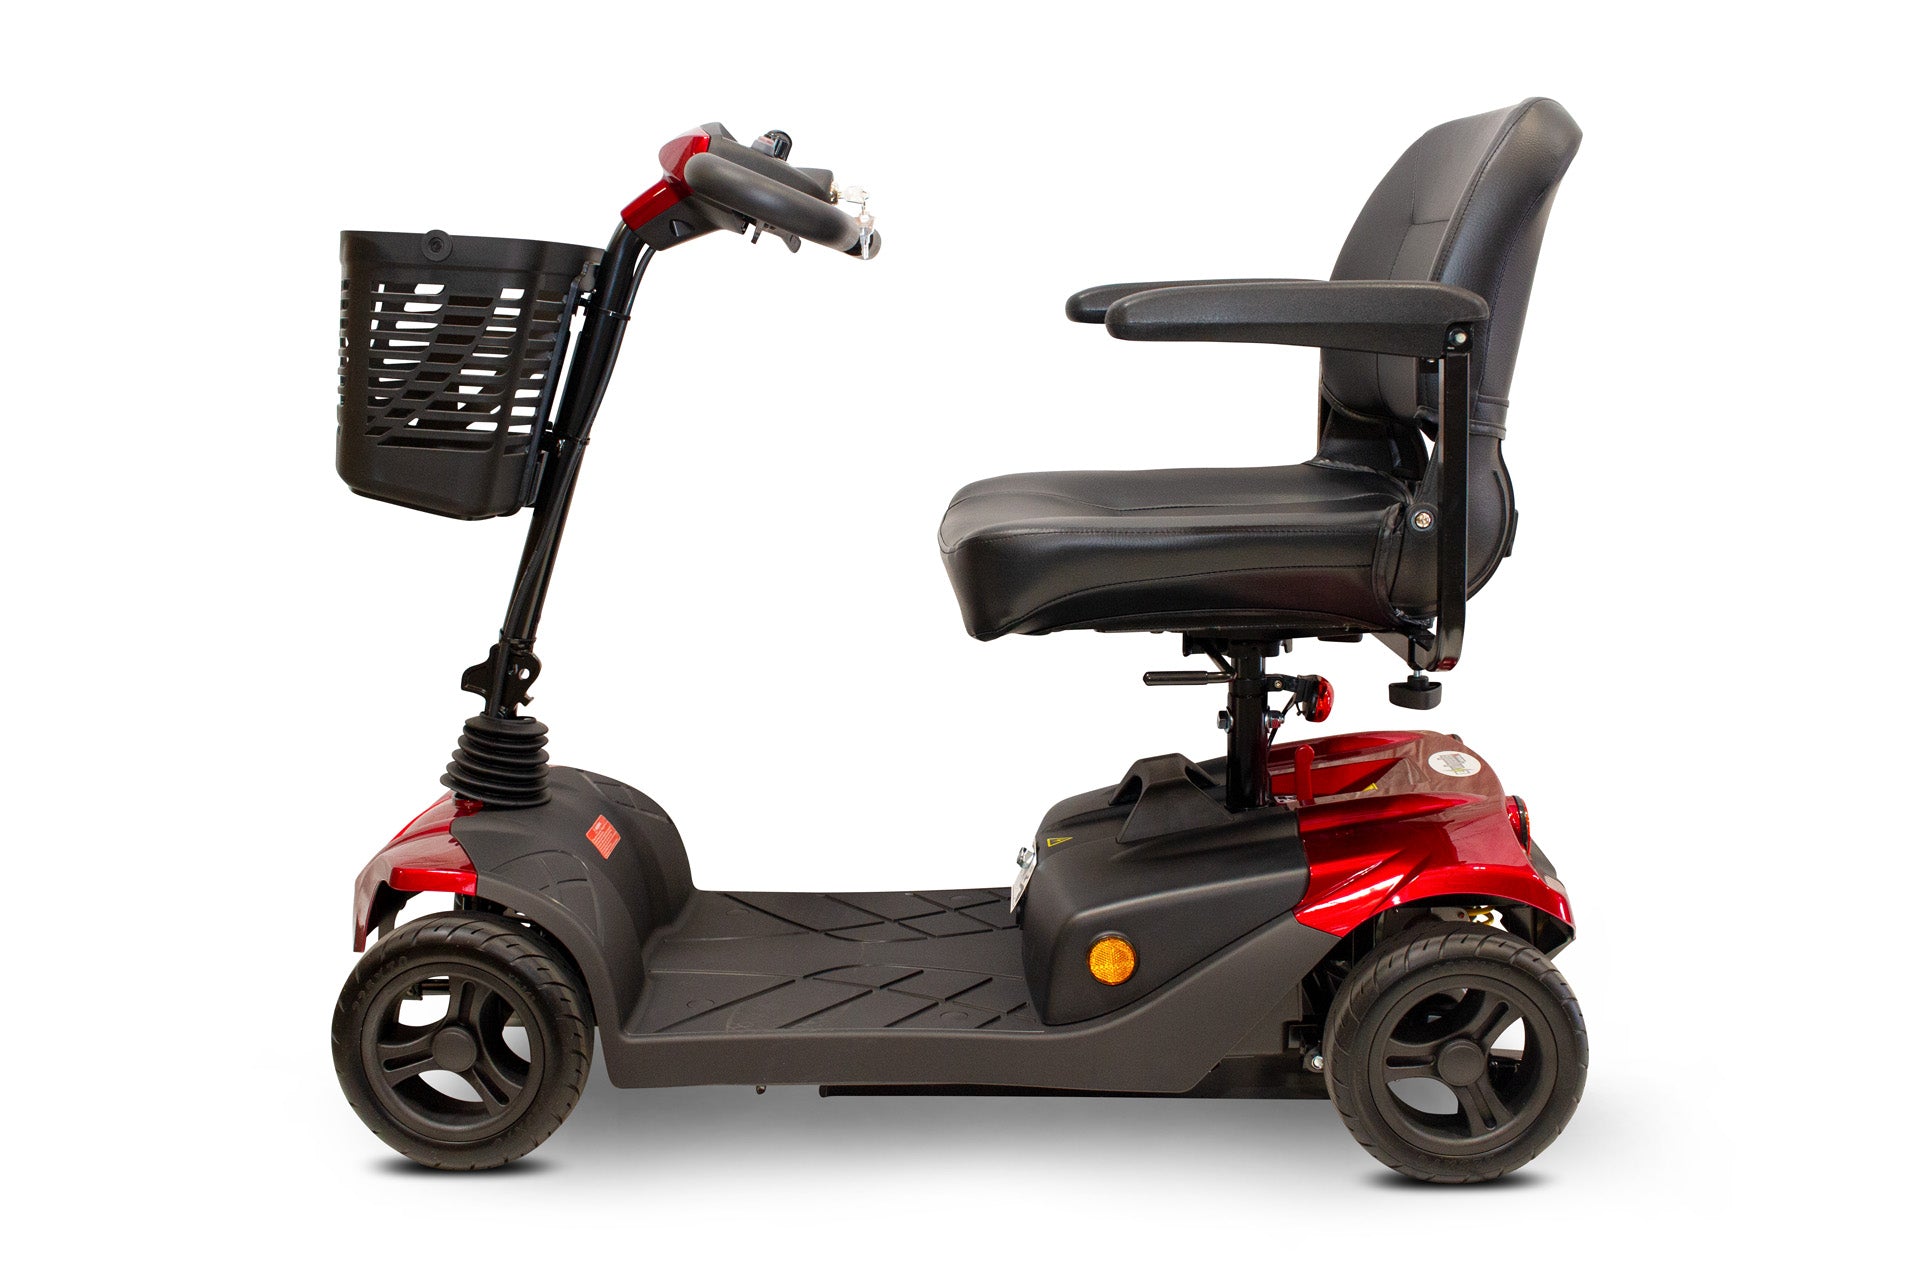 eWheels - 4 Wheels Medical Mobility Scooter - 350lbs Weight Capacity - EW-M41